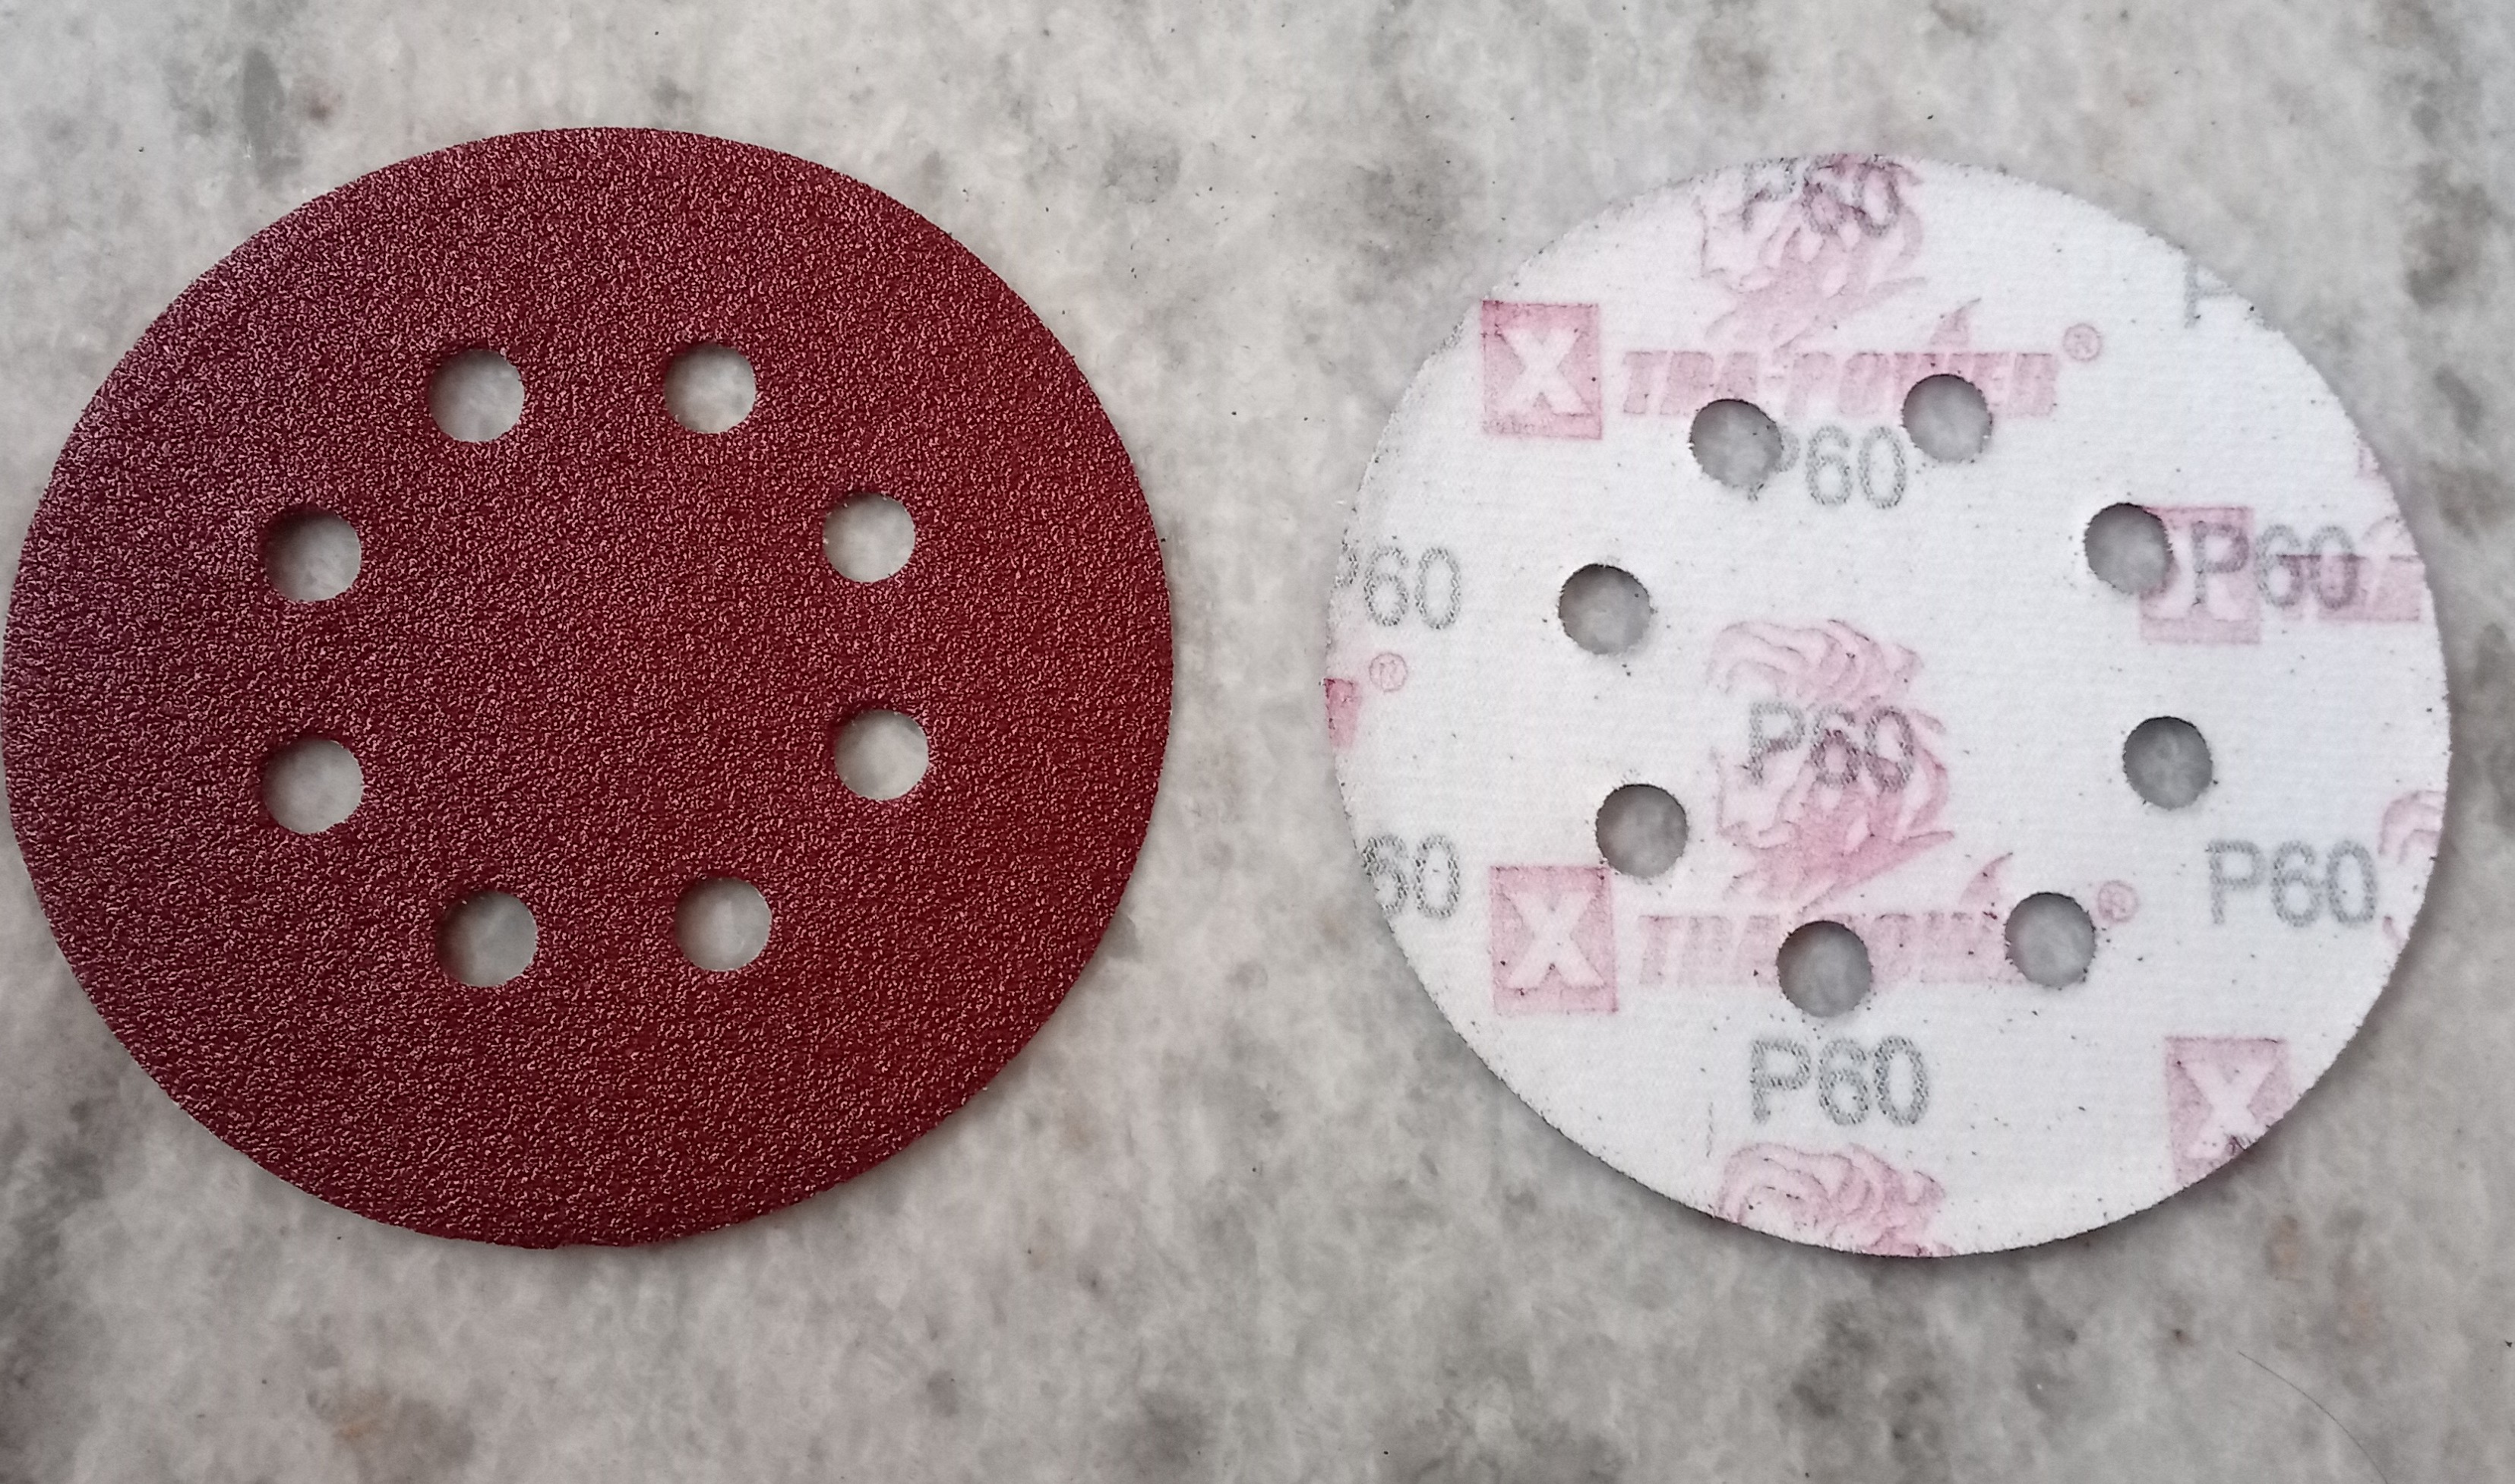 Buy Velcro Sanding Polishing Discs Grit Pack Of With Holes For Dust Vacuum Online